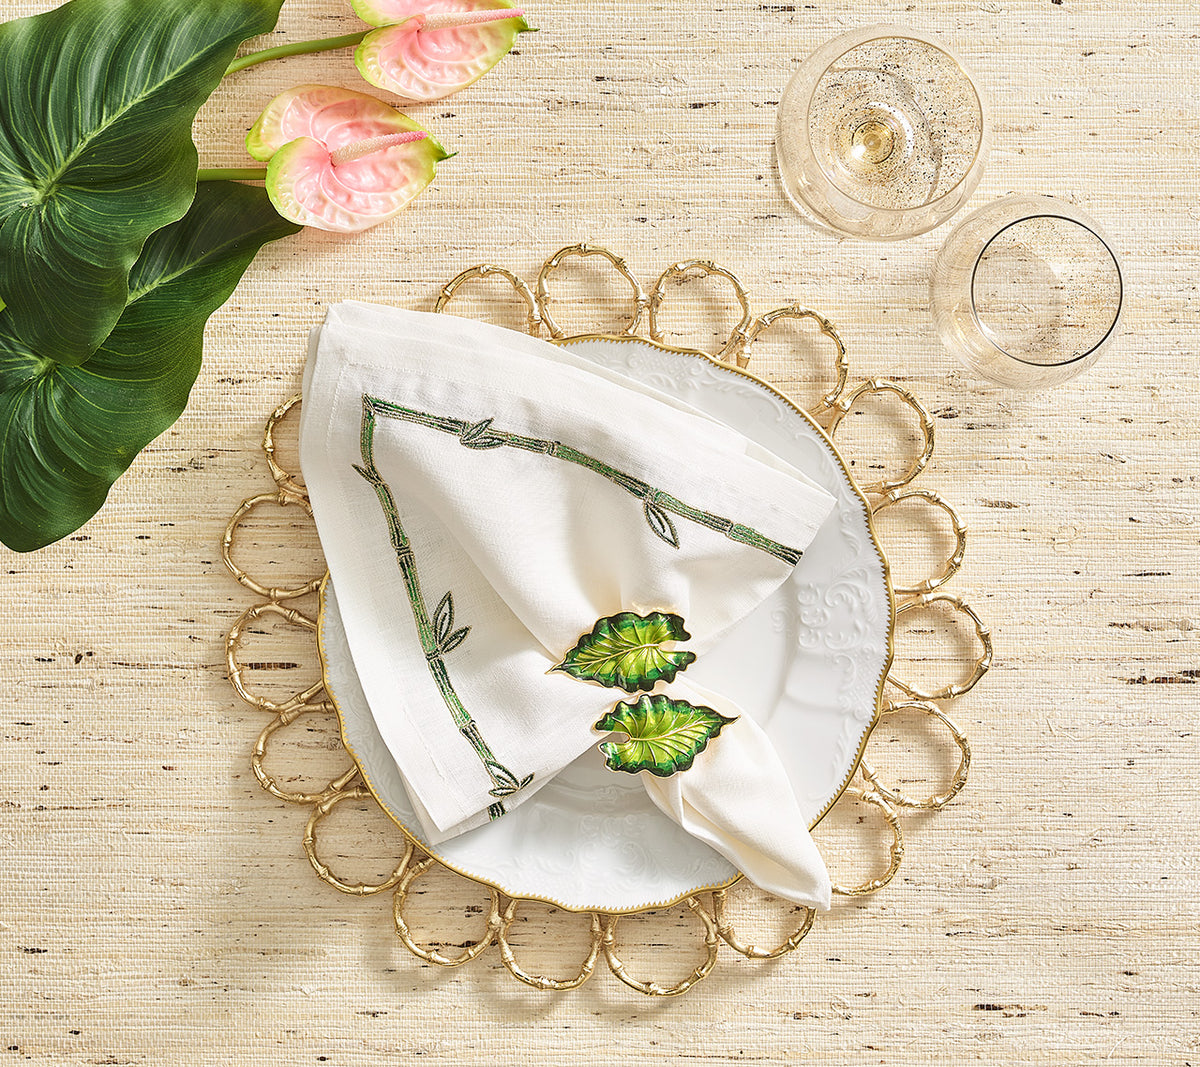 White Bamboo Napkin on top of a gold placemat